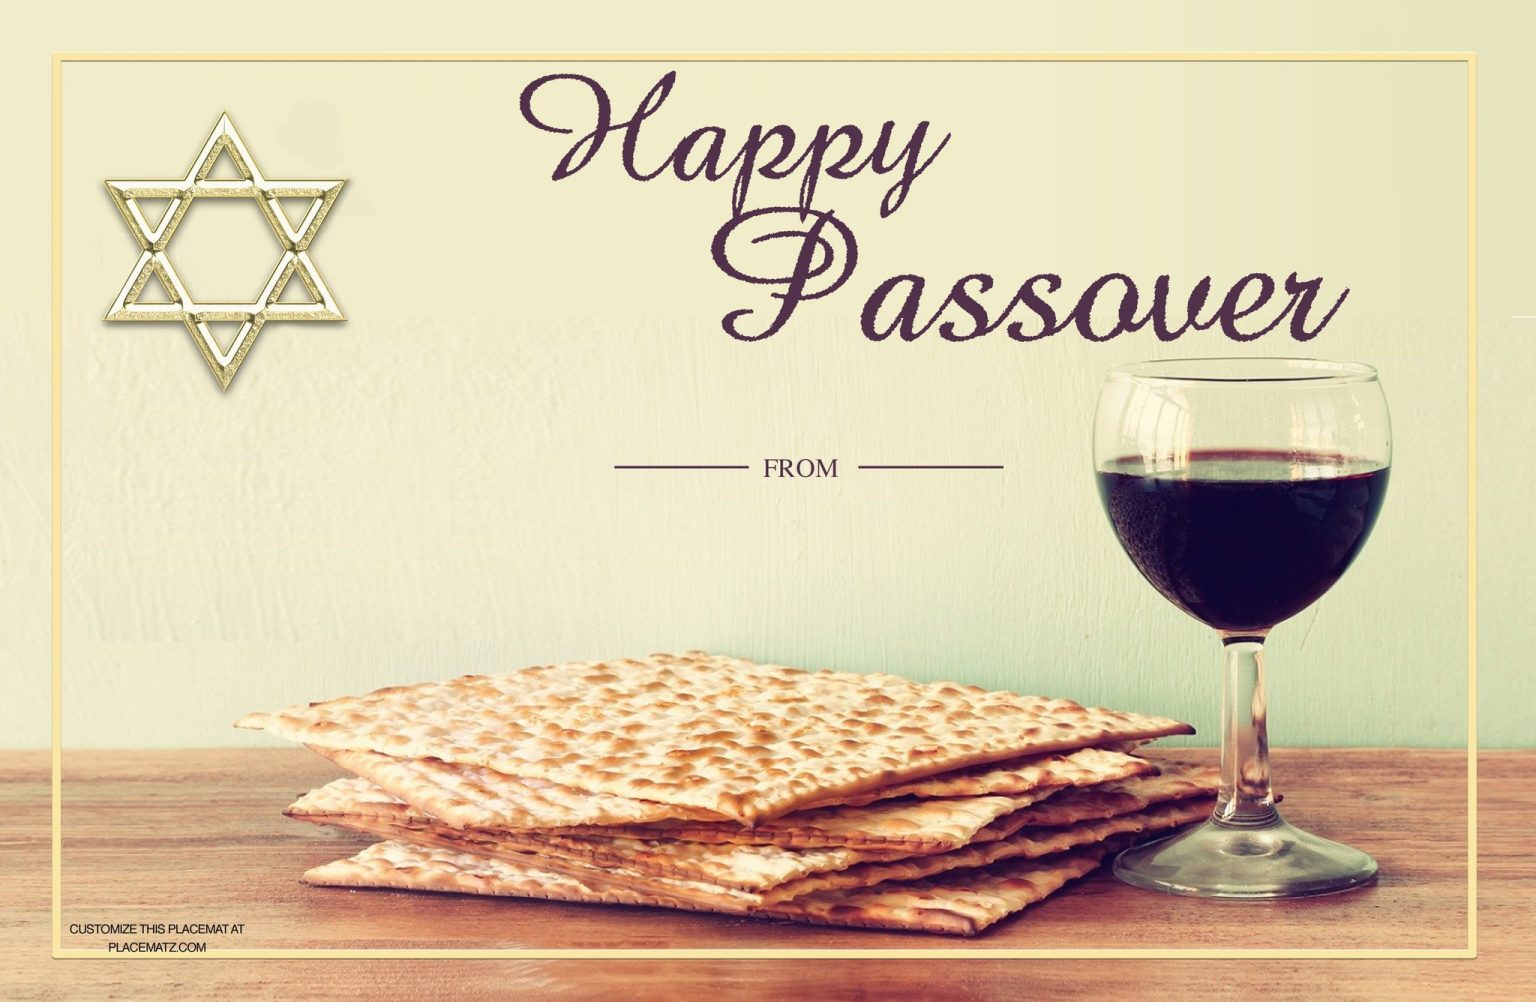 30-happy-passover-images-2020-pics-wallpapers-inspiring-wishes